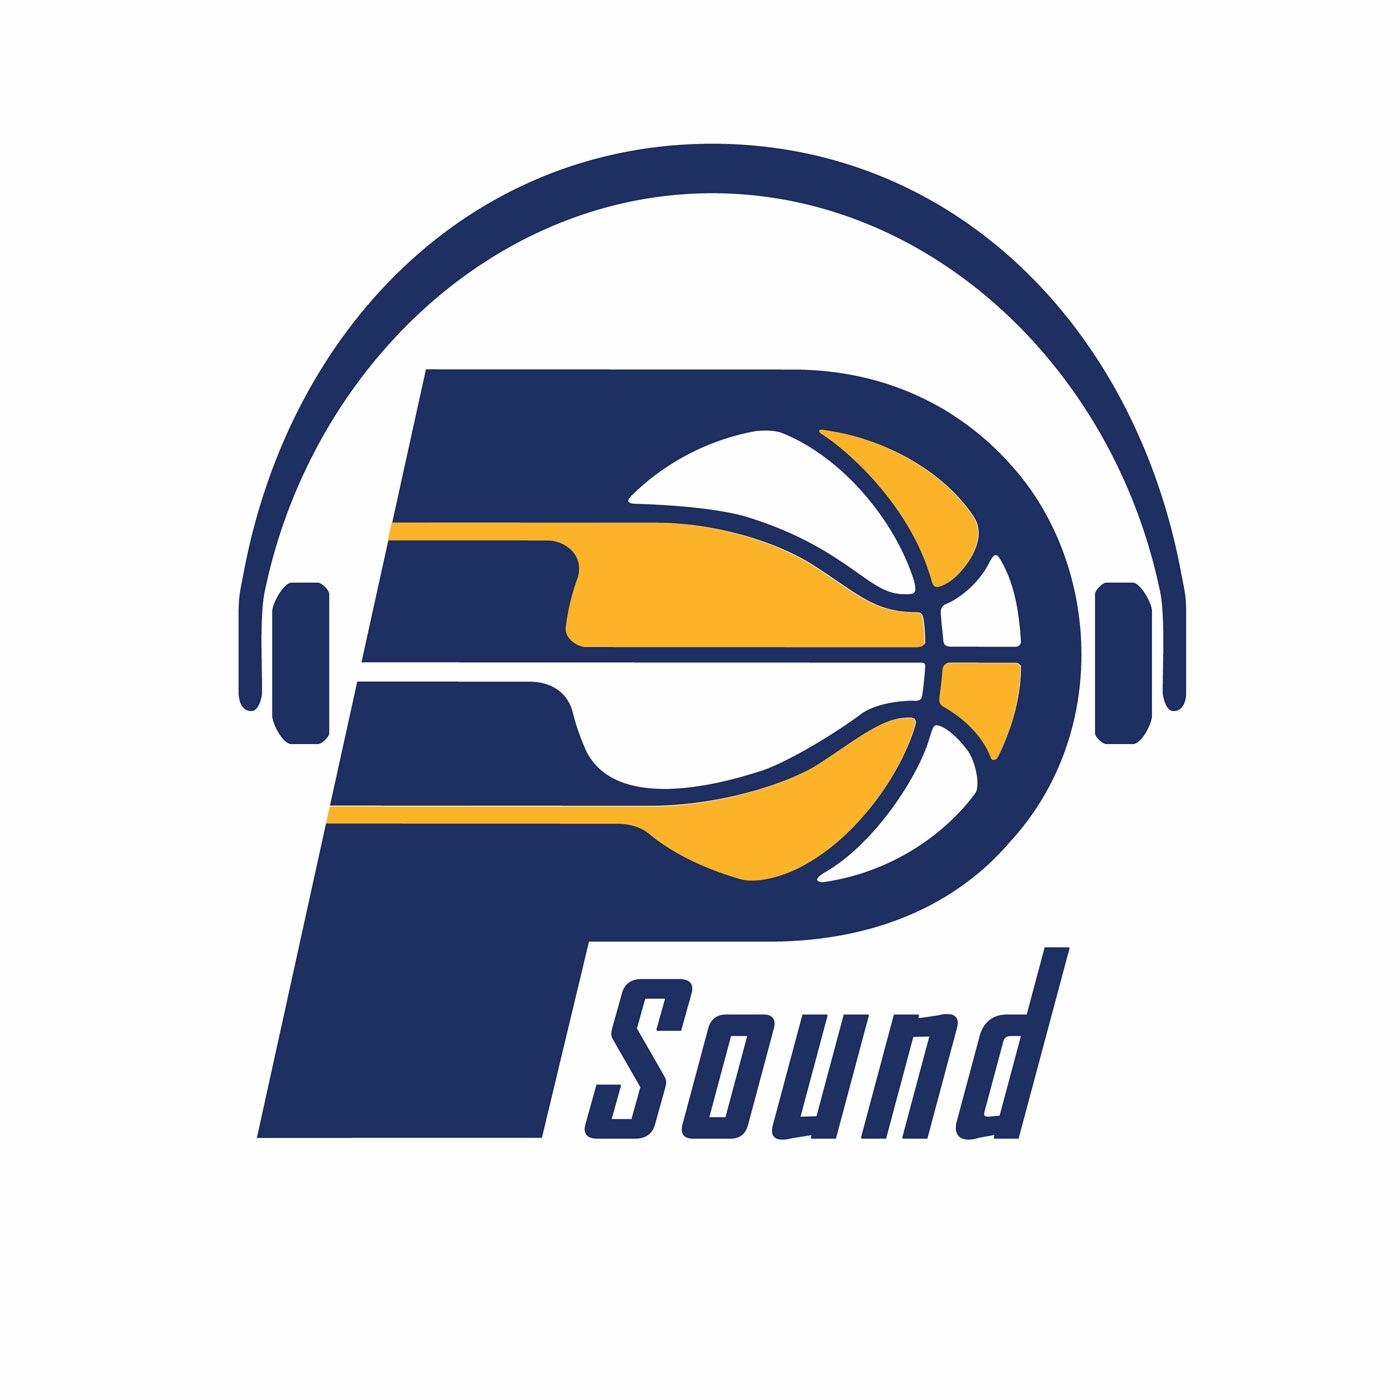 Pacers Sound podcast